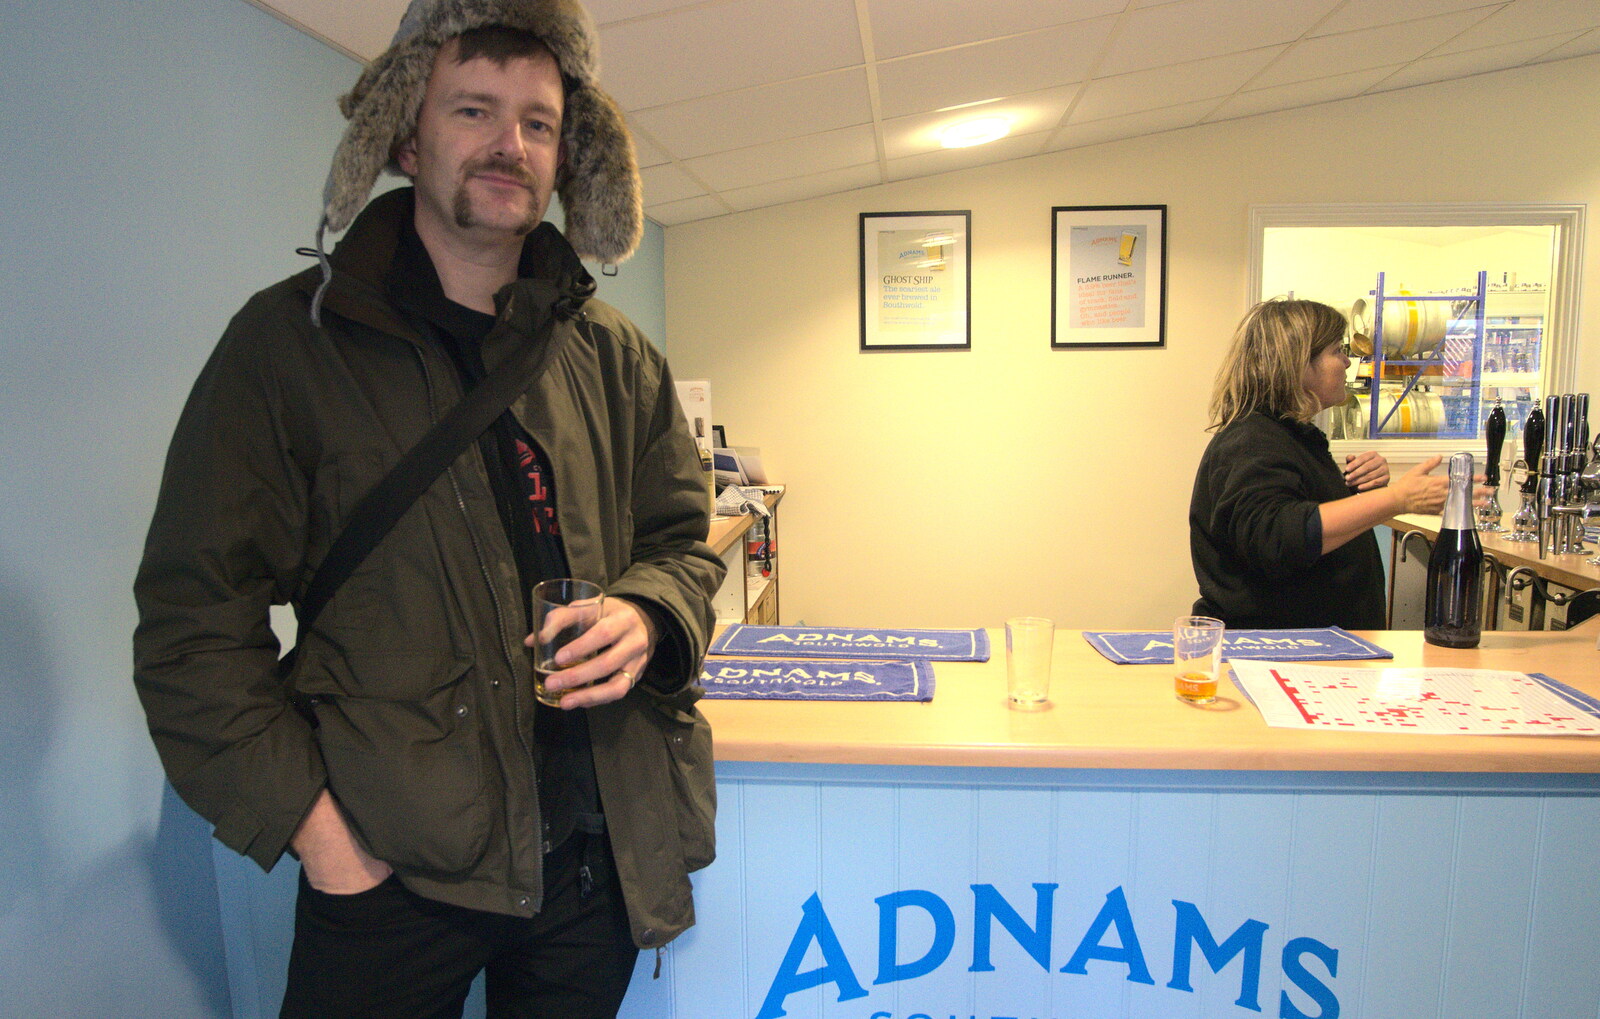 Nosher with 'Movember' special and Marc's hat from Apple's Adnams Brewery Birthday Tour, Southwold, Suffolk - 29th November 2012